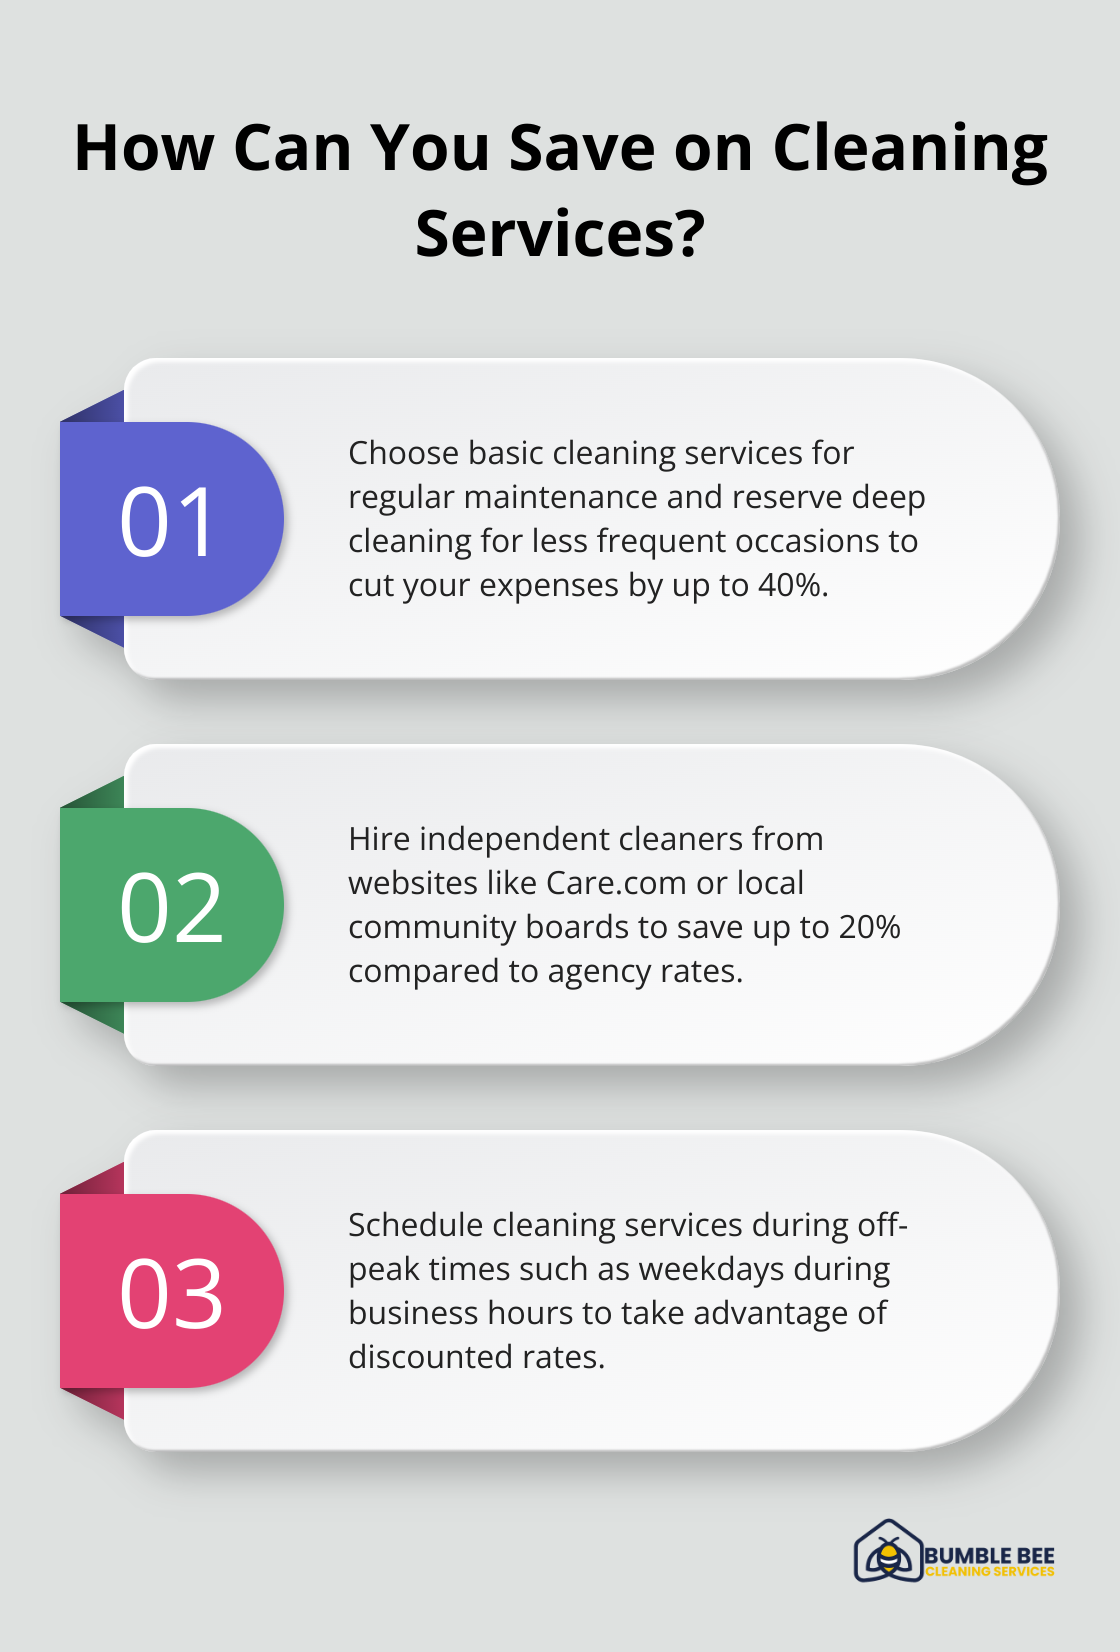 Fact - How Can You Save on Cleaning Services?